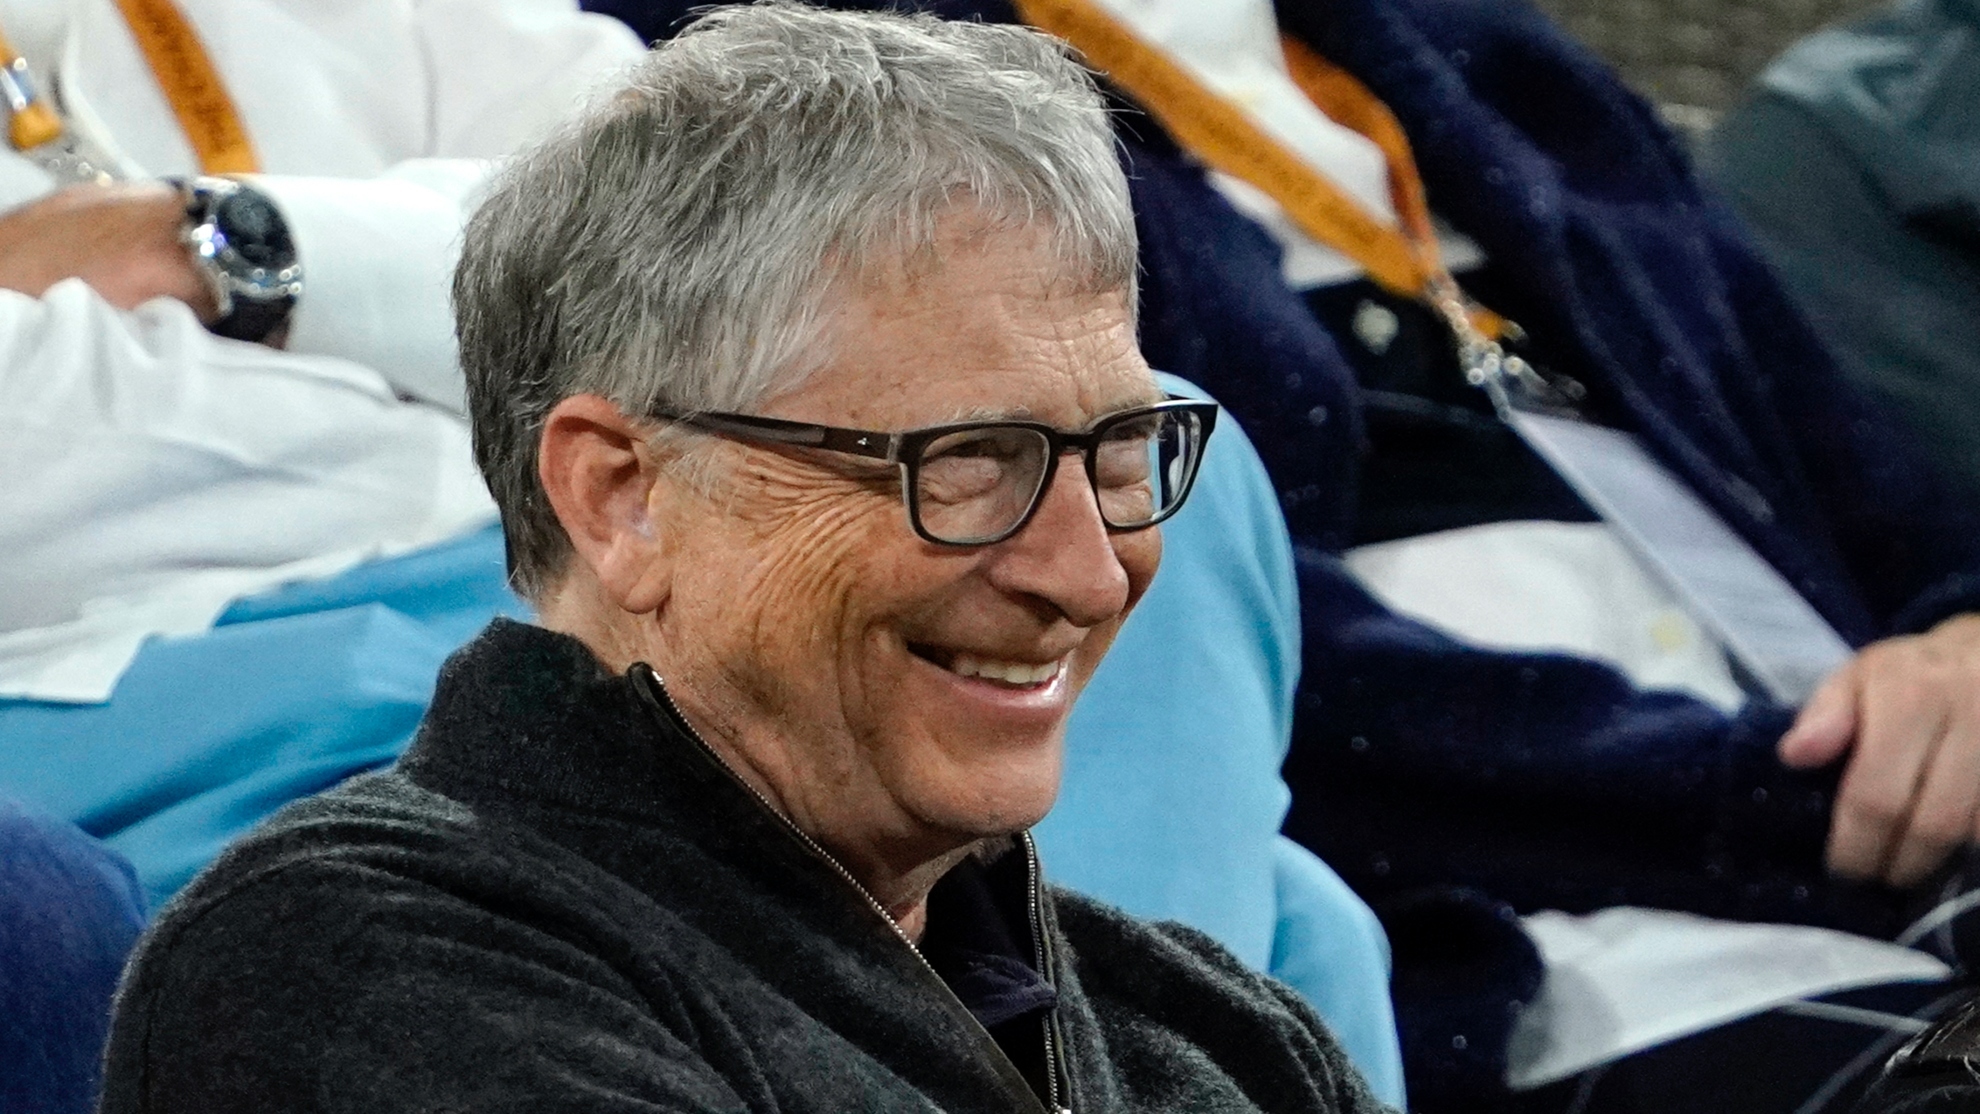 Microsoft founder Bill gates watches Cameron Norrie, of Britain, play Jenson Brooksby at the BNP Paribas Open tennis tournament Wednesday, March 16, 2022